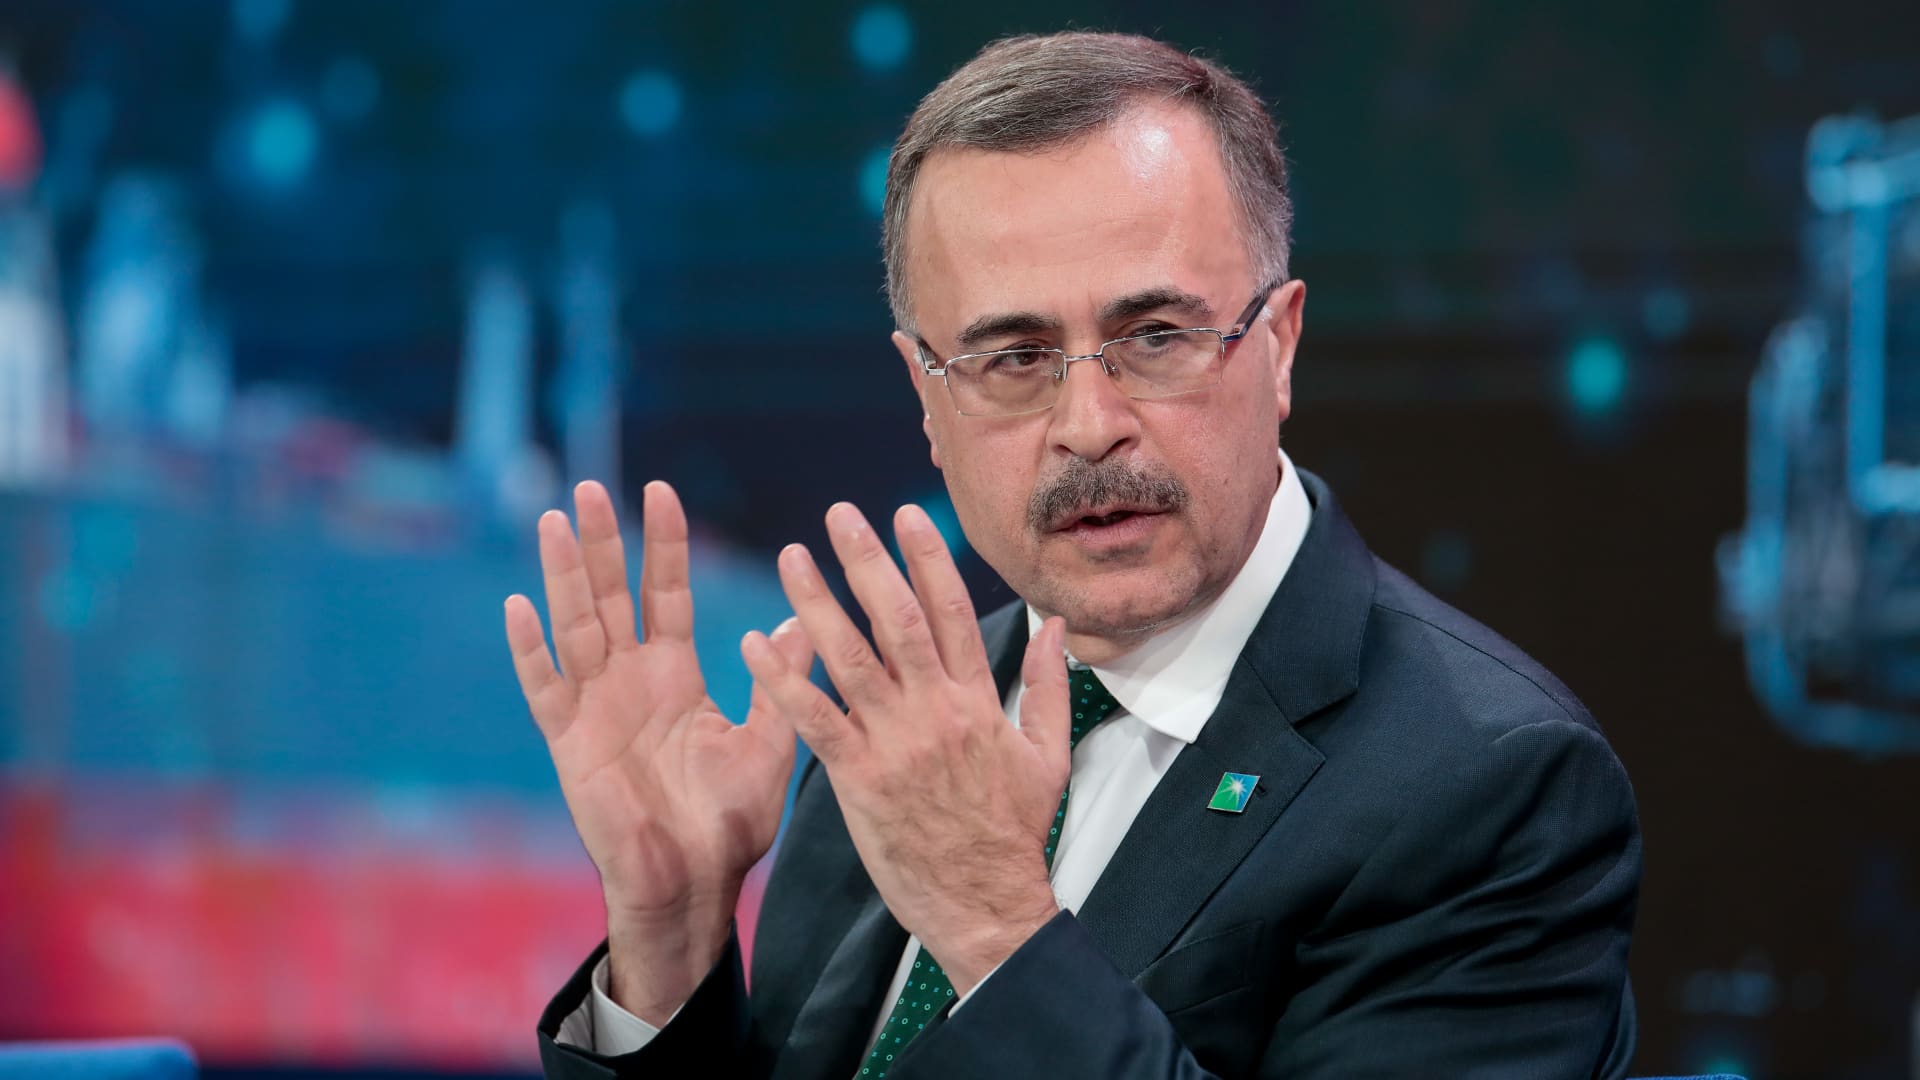 Amin Nasser, chief executive officer of Saudi Aramco, gestures as he speaks during a panel session on day three of the World Economic Forum (WEF) in Davos, Switzerland, on Thursday, Jan. 23, 2020.